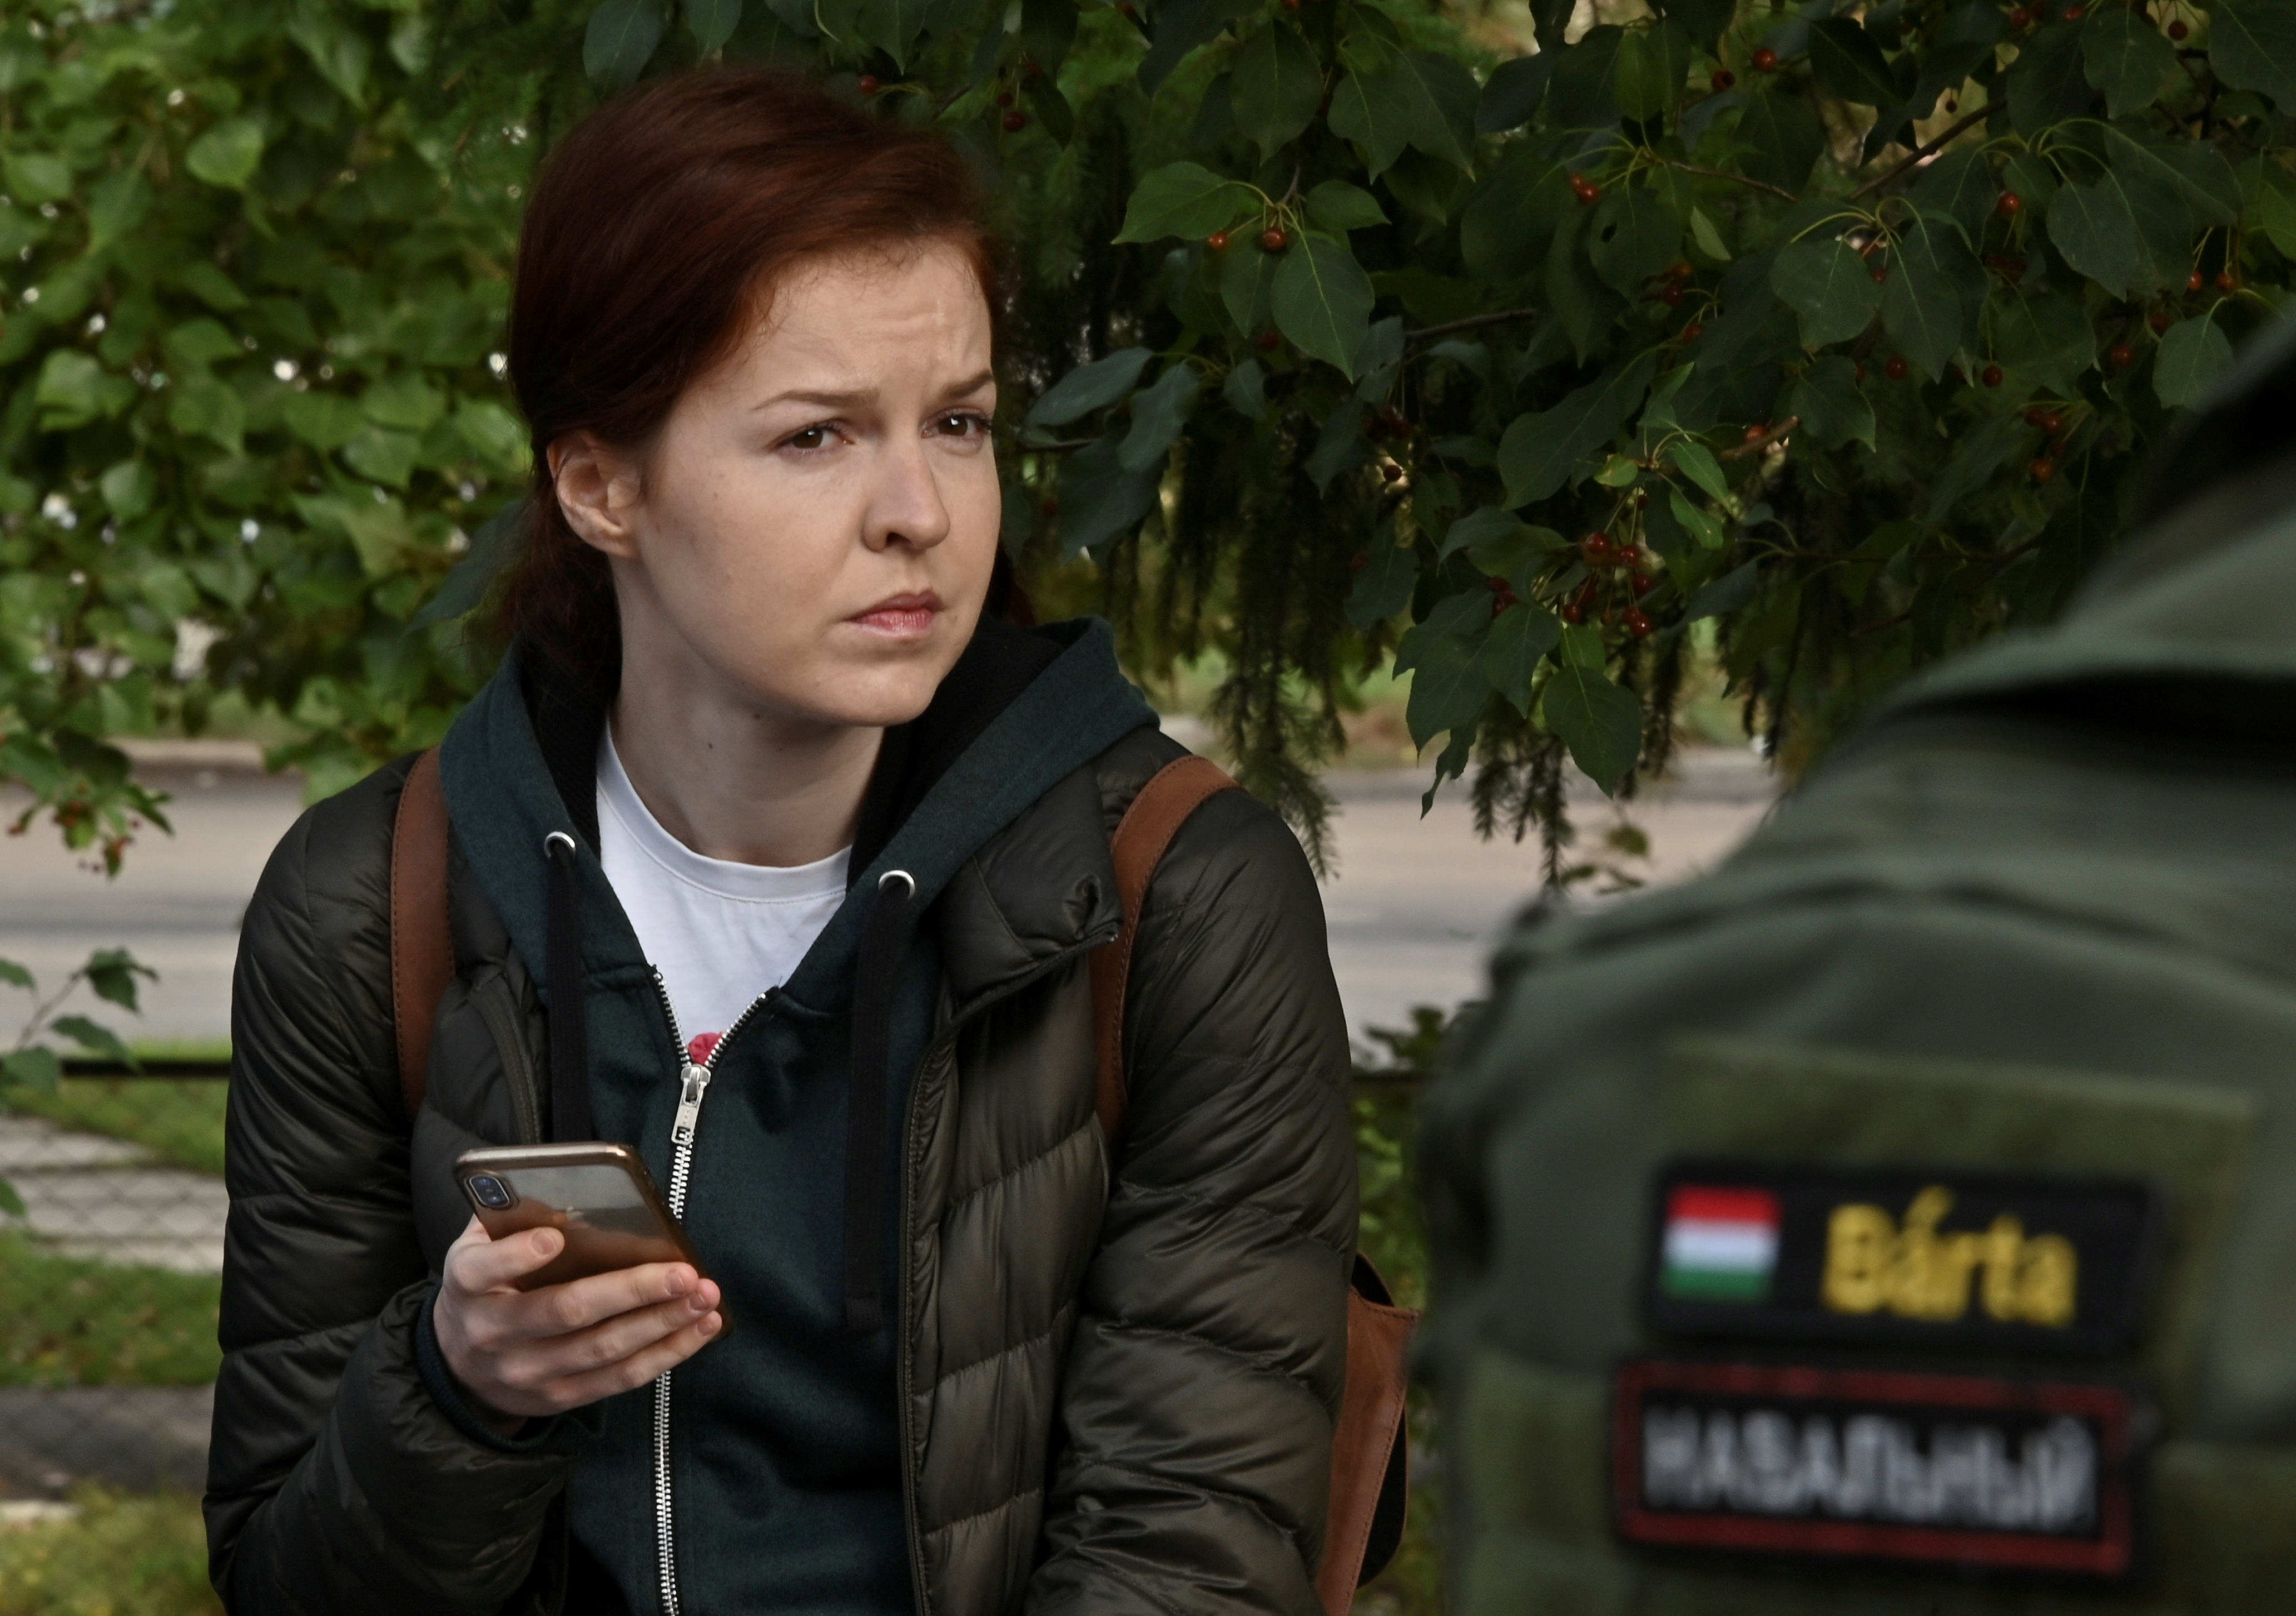 Kira Yarmysh, spokeswoman of Russian opposition leader Alexei Navalny, waits outside a hospital in Omsk